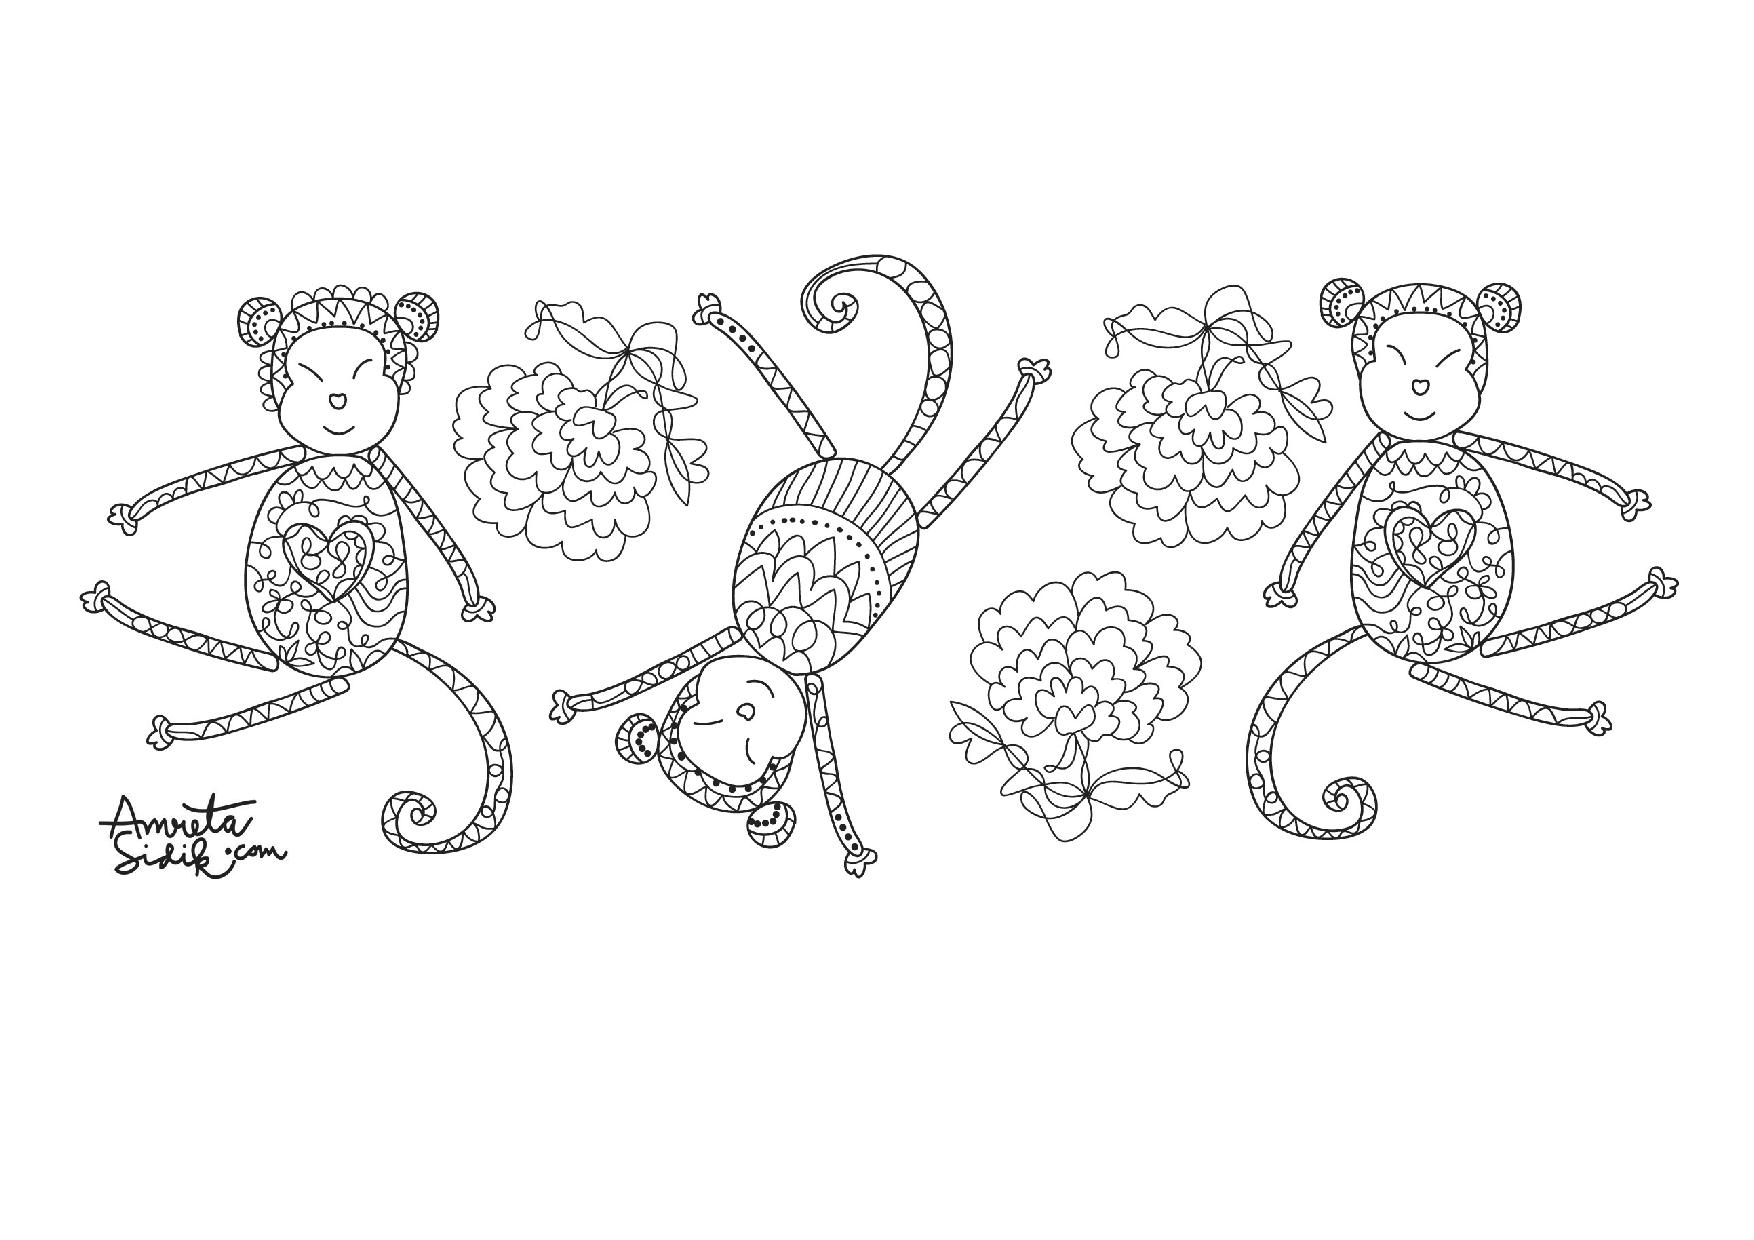 Coloring to celebrate the year of the monkey